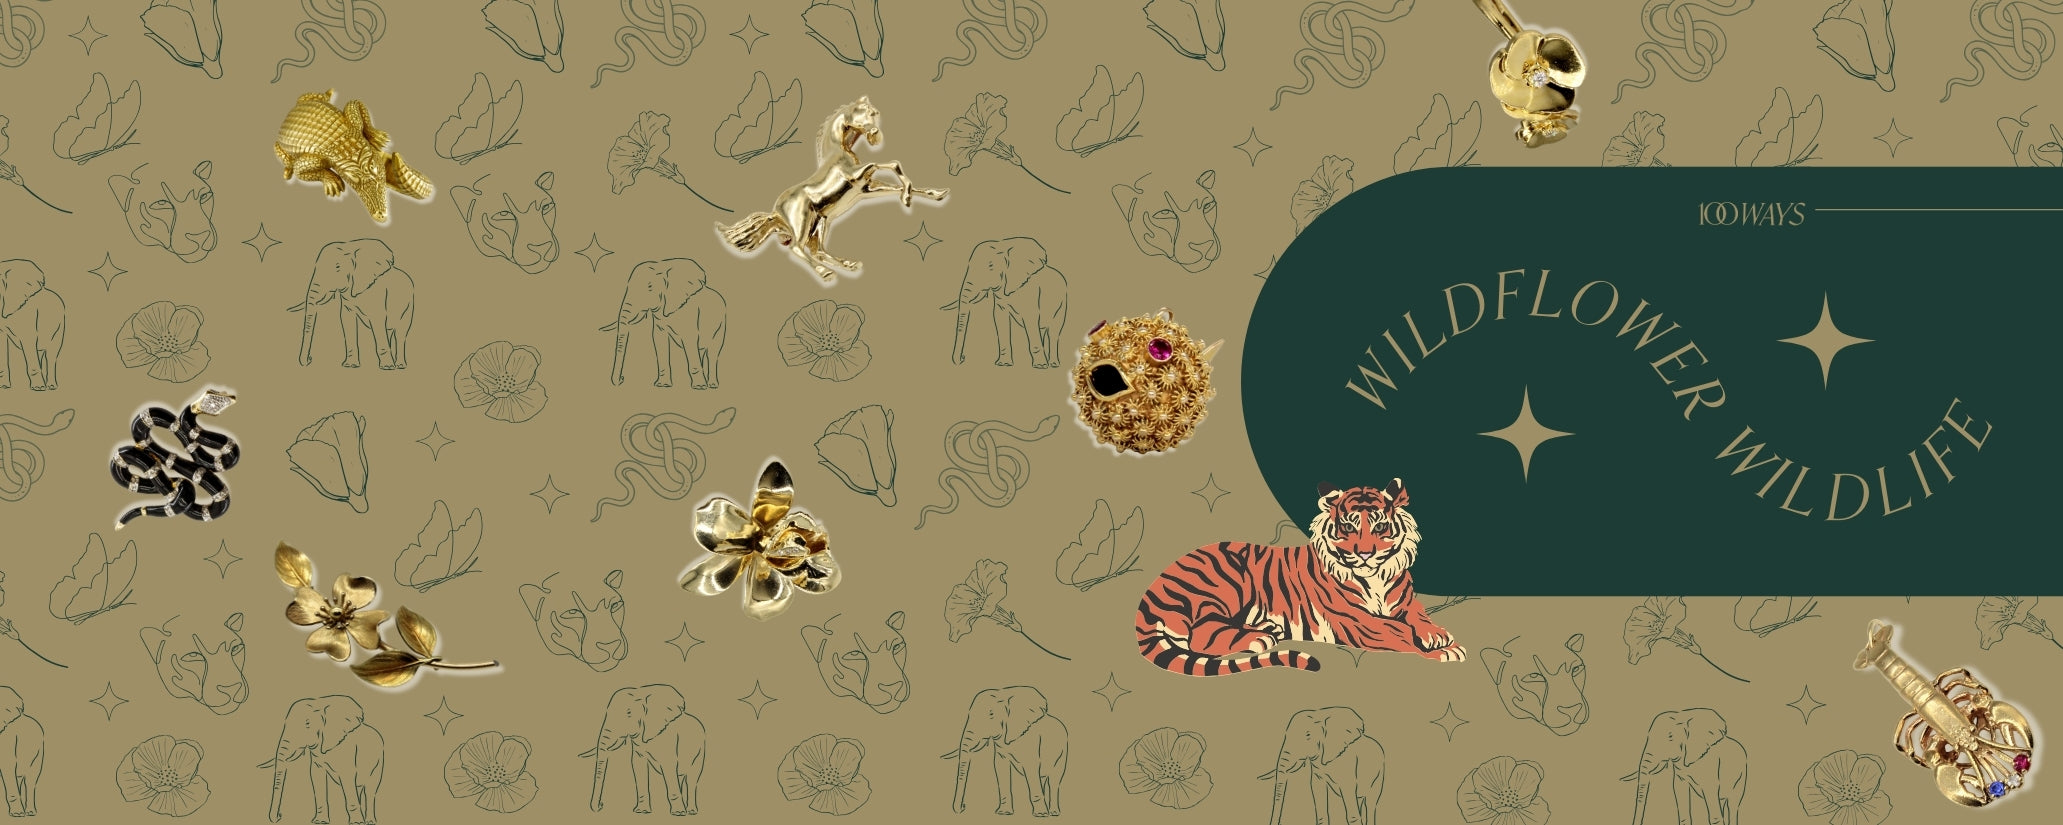 Monoline nature inspired artwork as wallpaper, with assortment of nature inspired jewelry over top. Text over image: Wildflower Wildlife 100 Ways